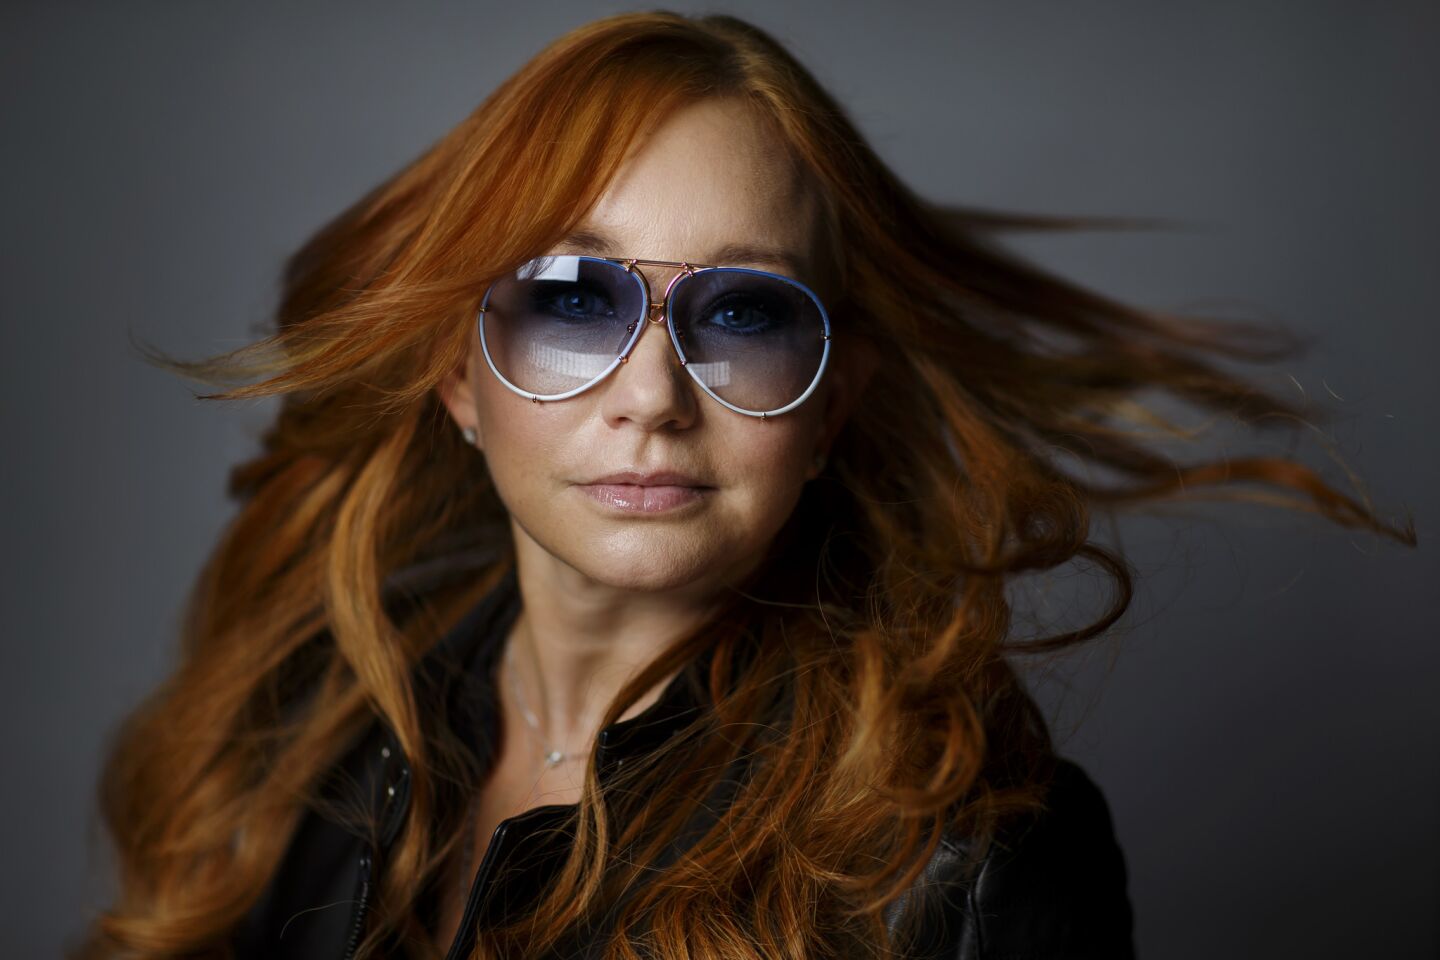 Celebrity portraits by The Times | Tori Amos